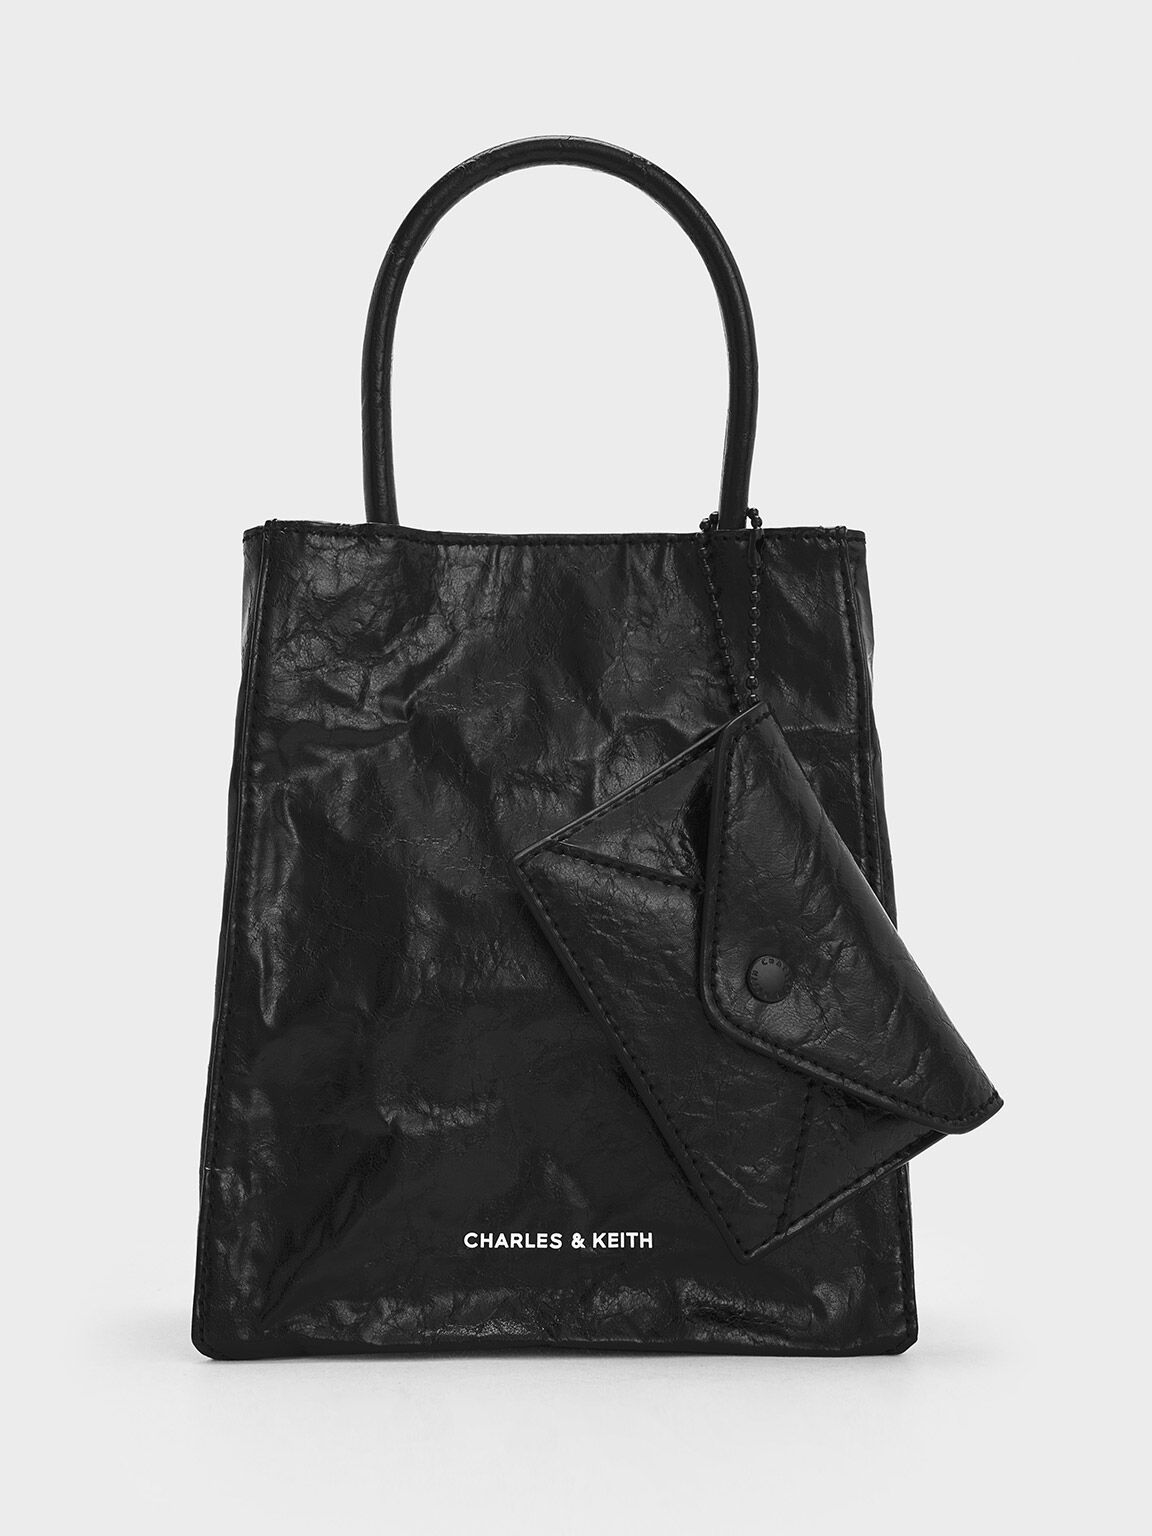 Women's Bags | Shop Exclusive Styles | CHARLES & KEITH US